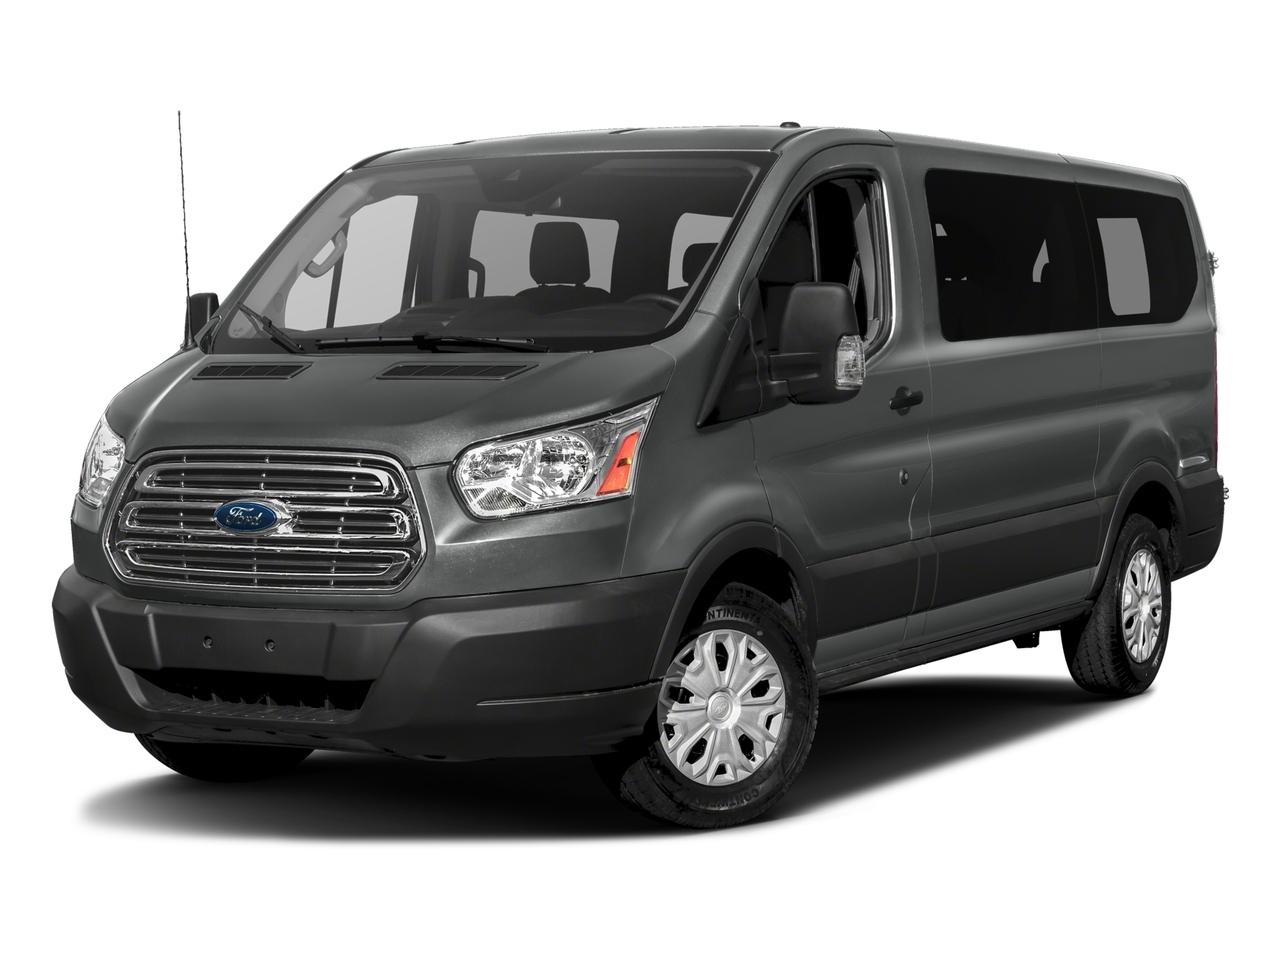 2017 Ford Transit Wagon Vehicle Photo in Plainfield, IL 60586